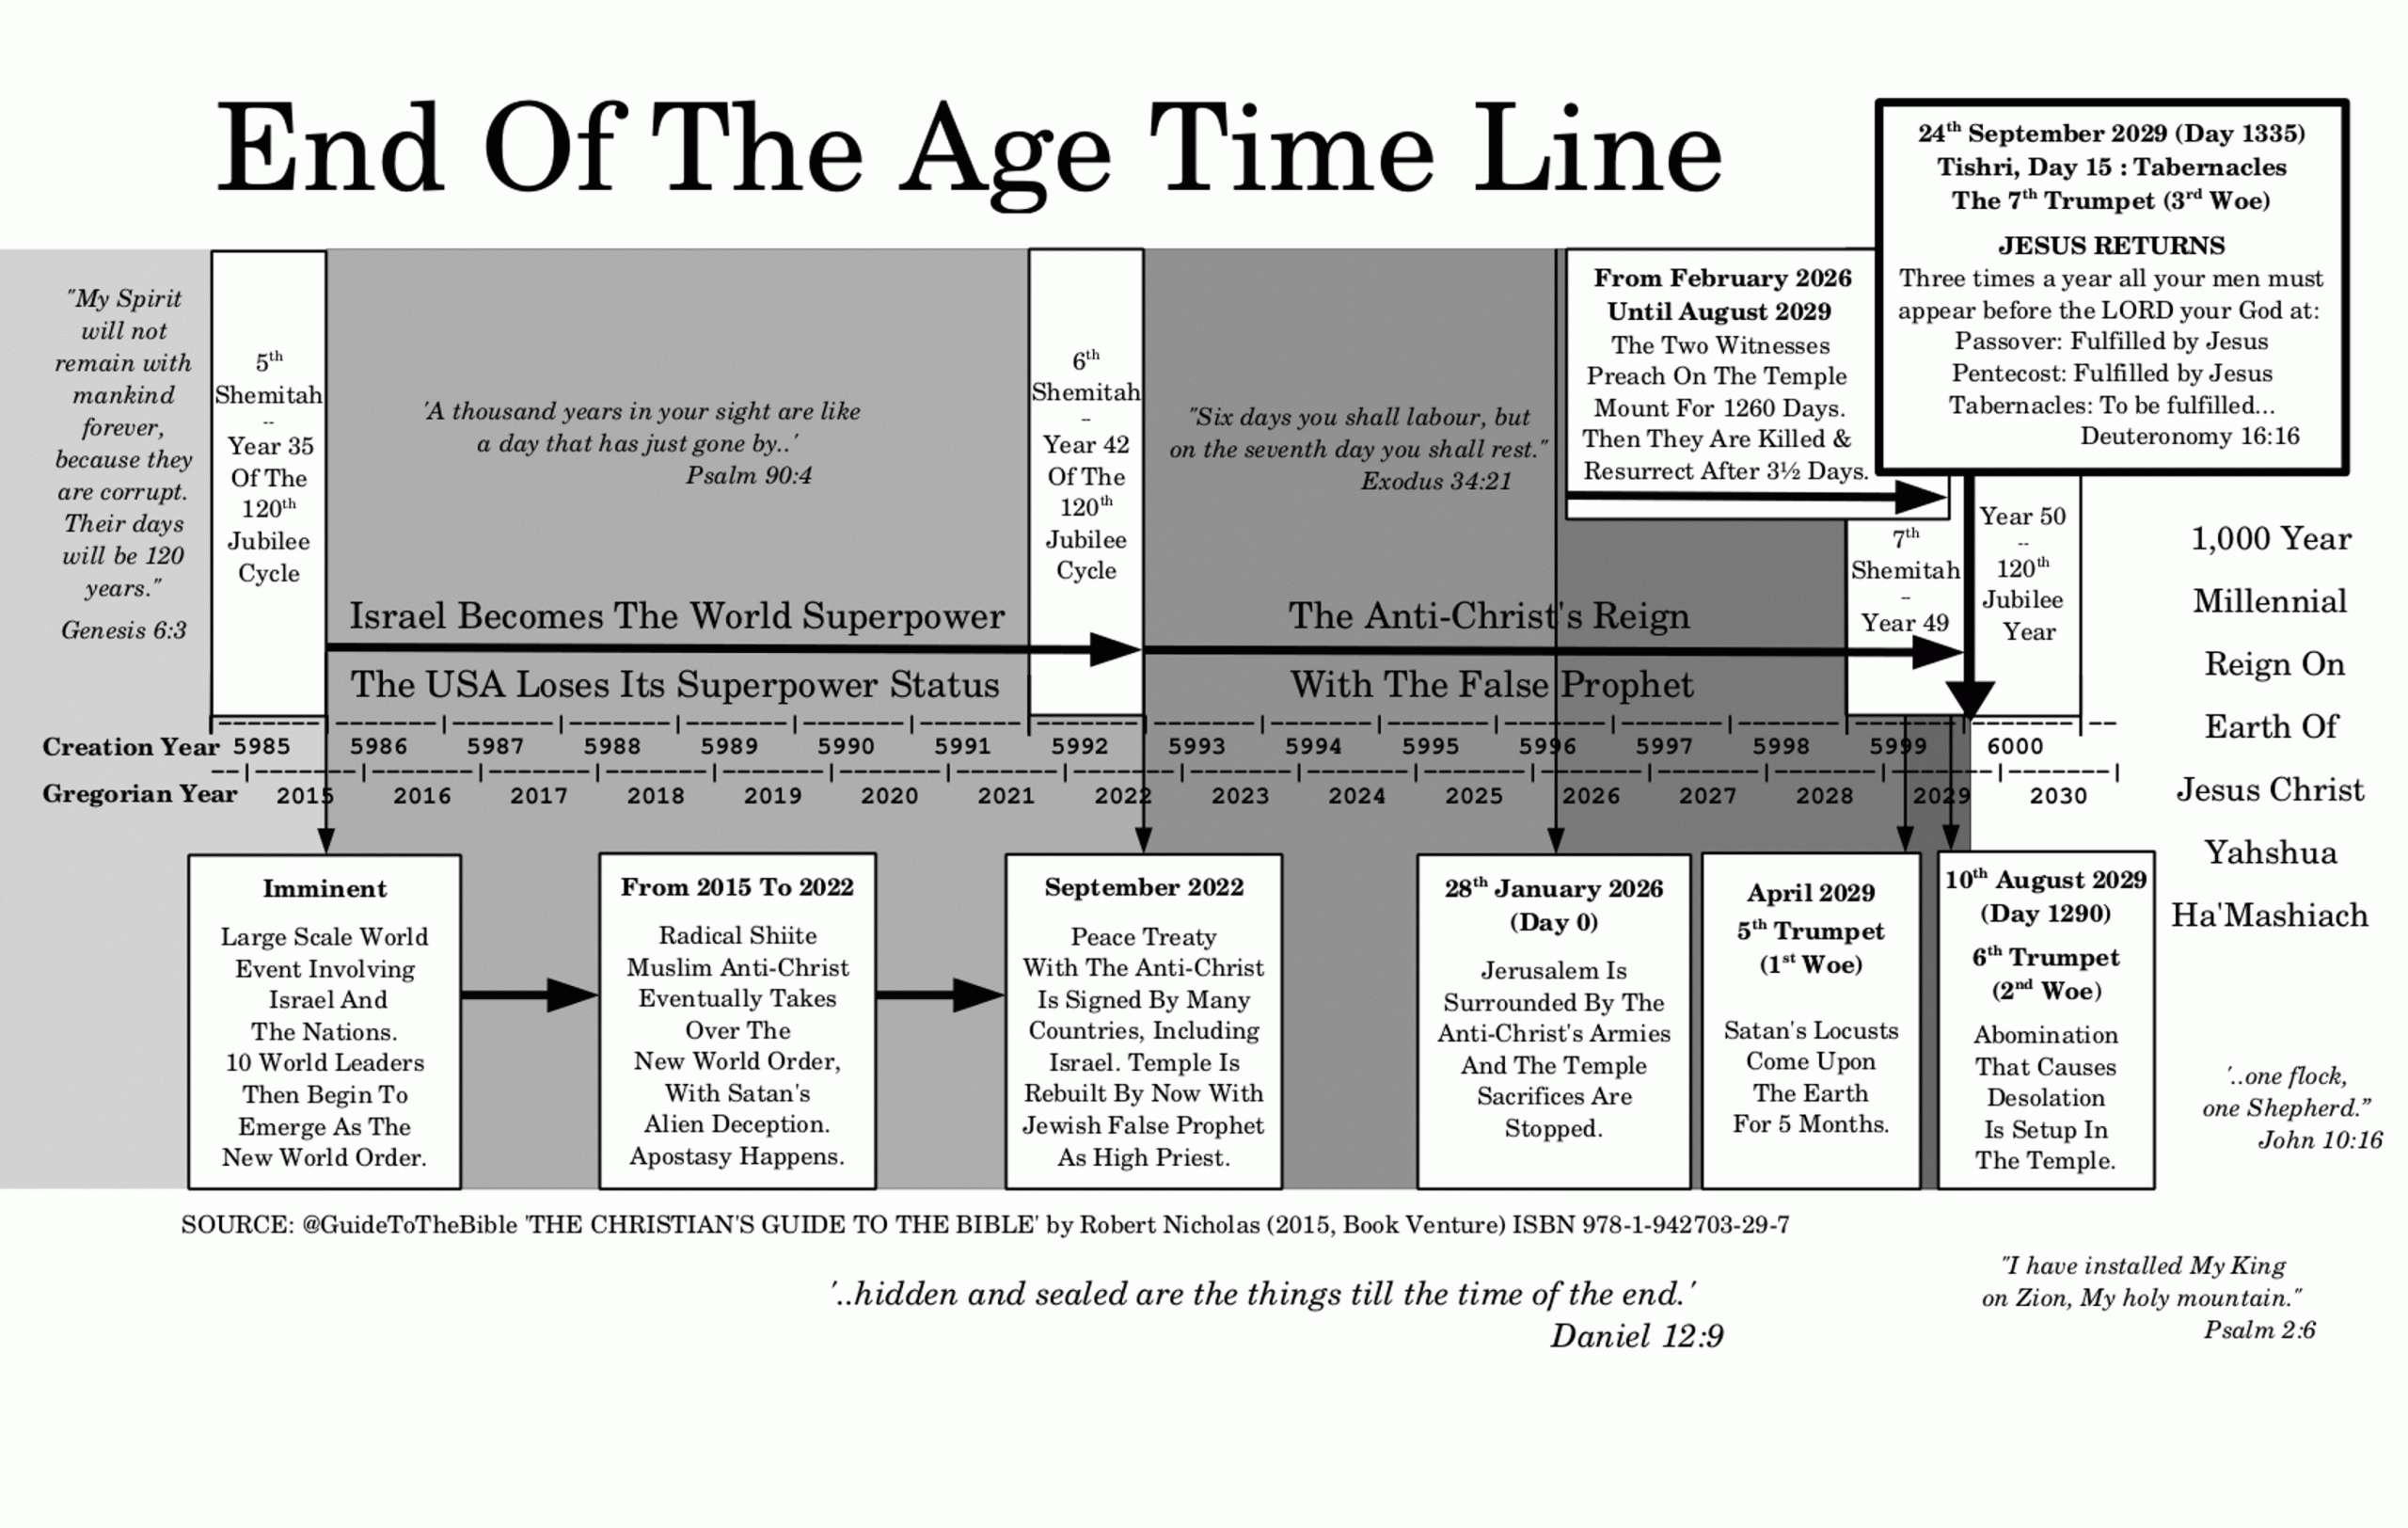 Guide_Graphical_Timeline_2015_08_27pm_enlarged.gif